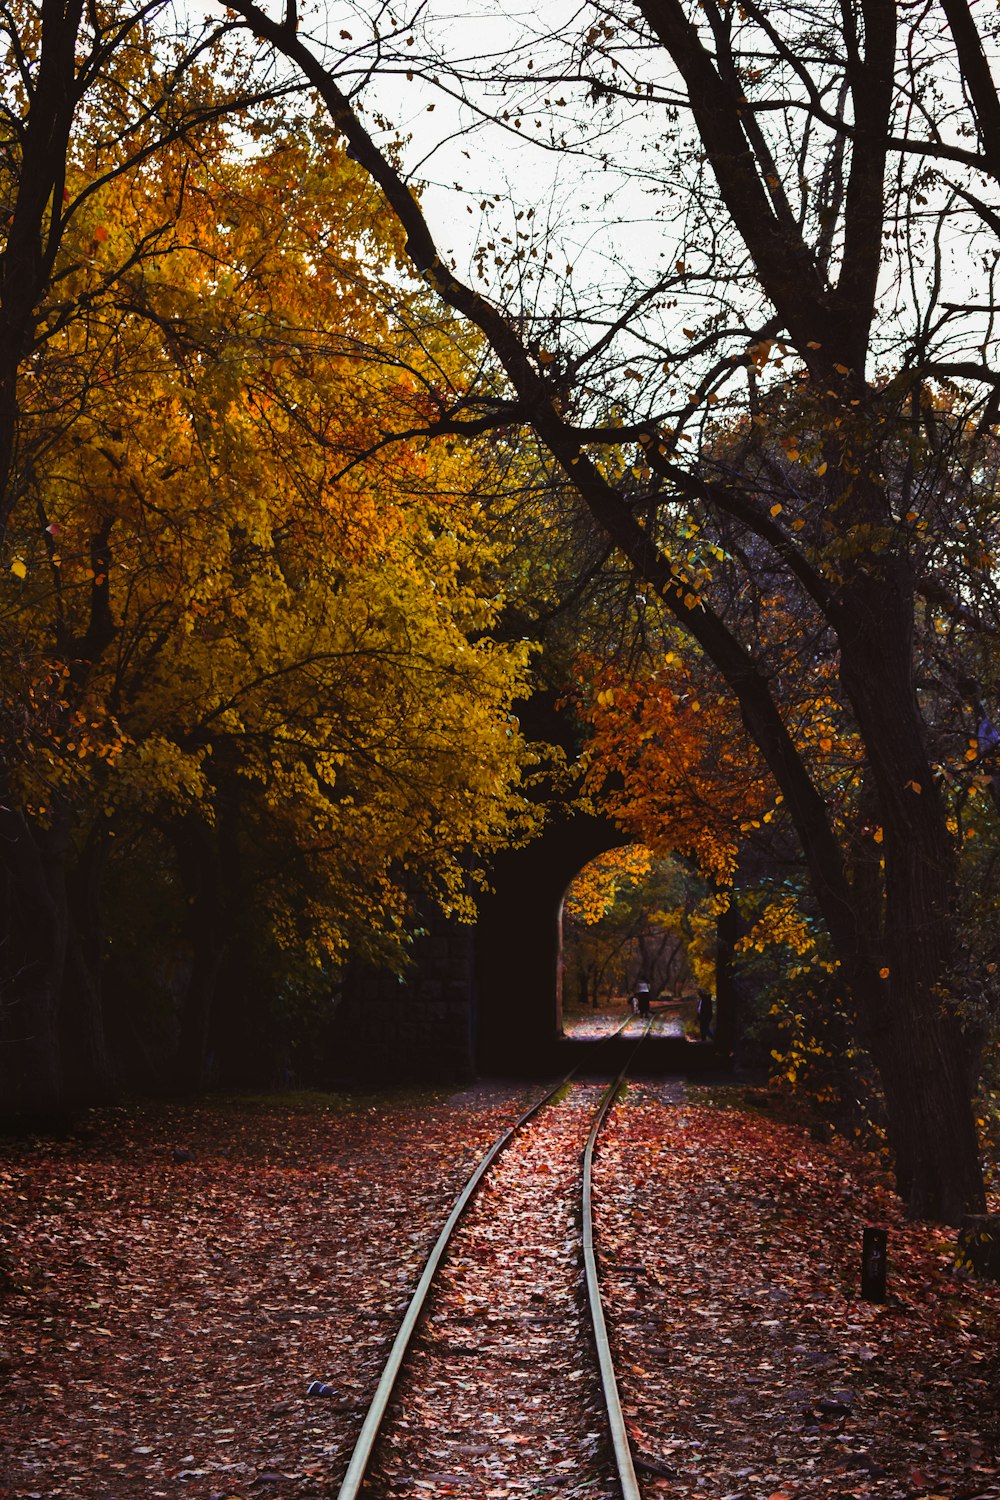 a train track surrounded by trees and leaves